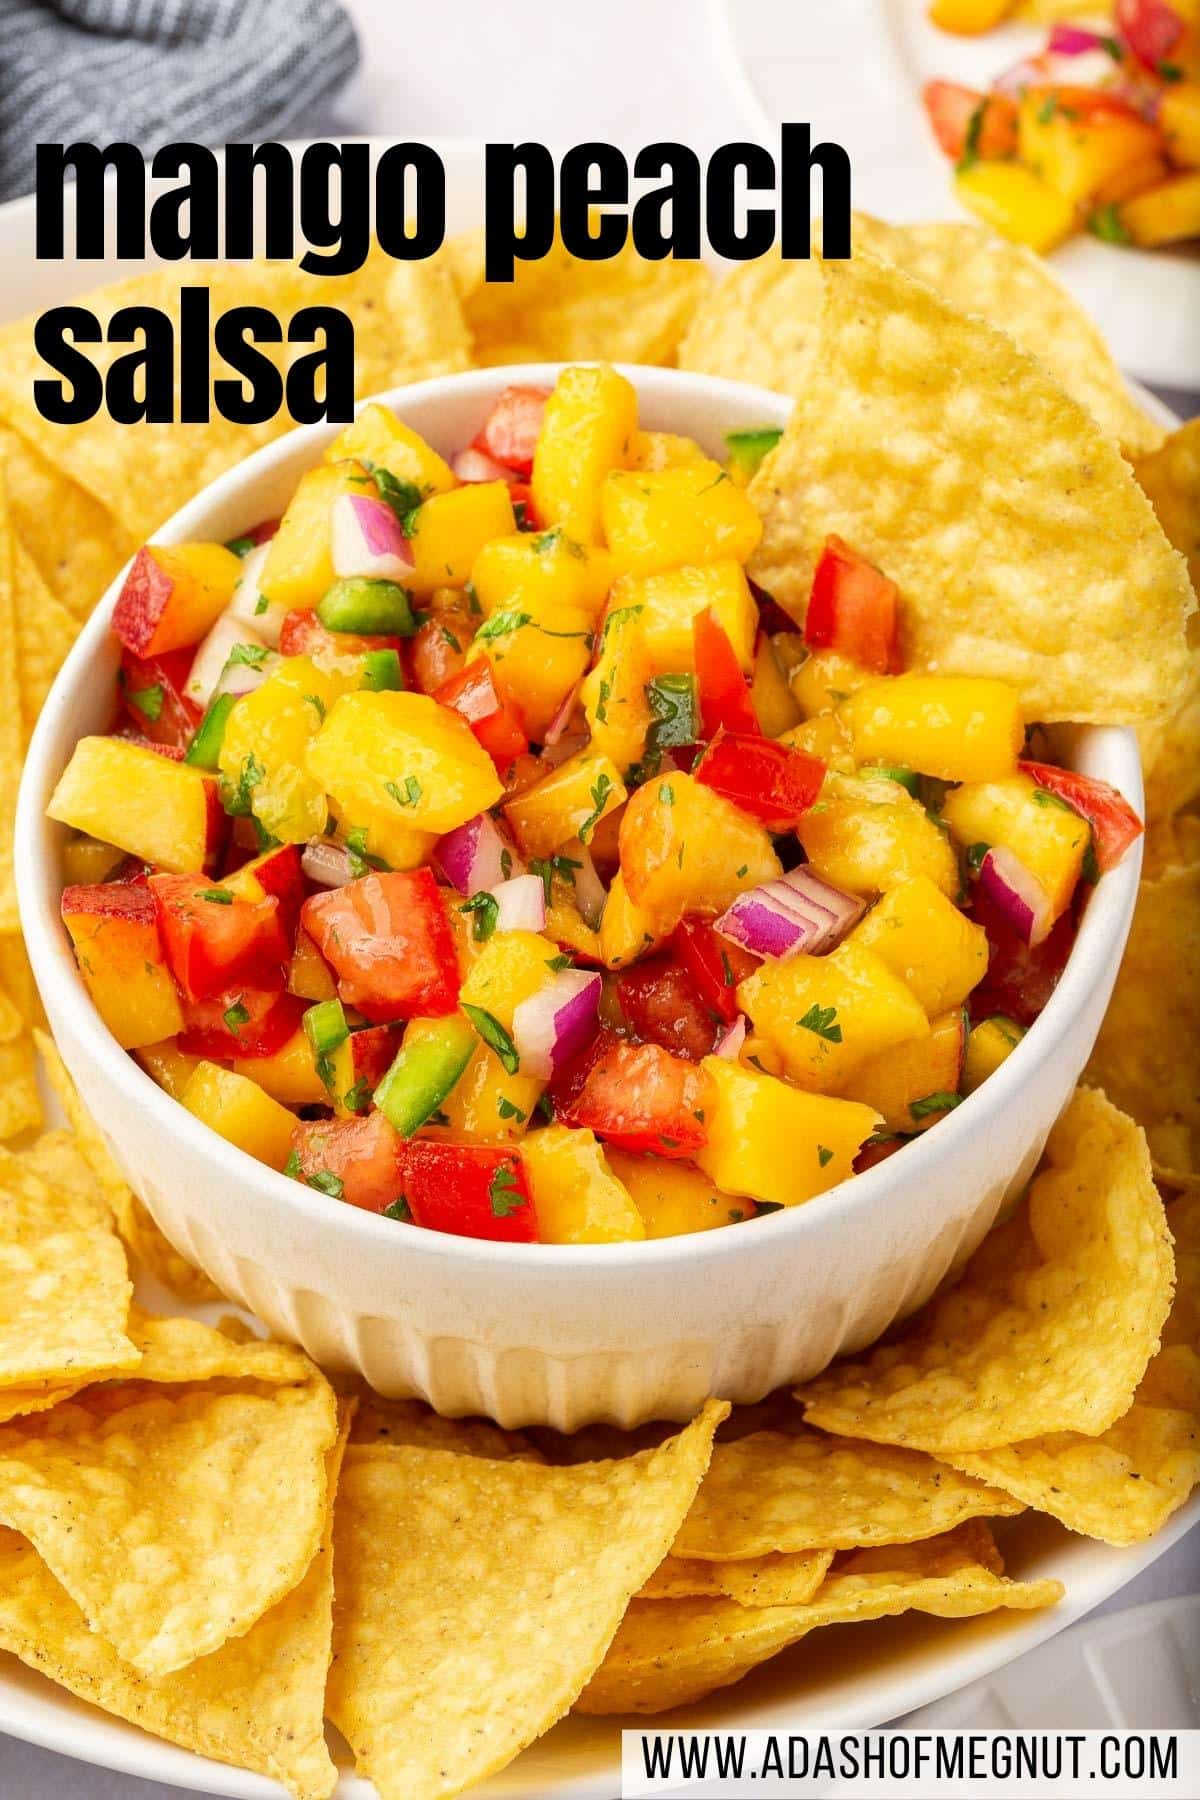 A bowl of peach mango salsa with tomatoes on a plate of tortilla chips.